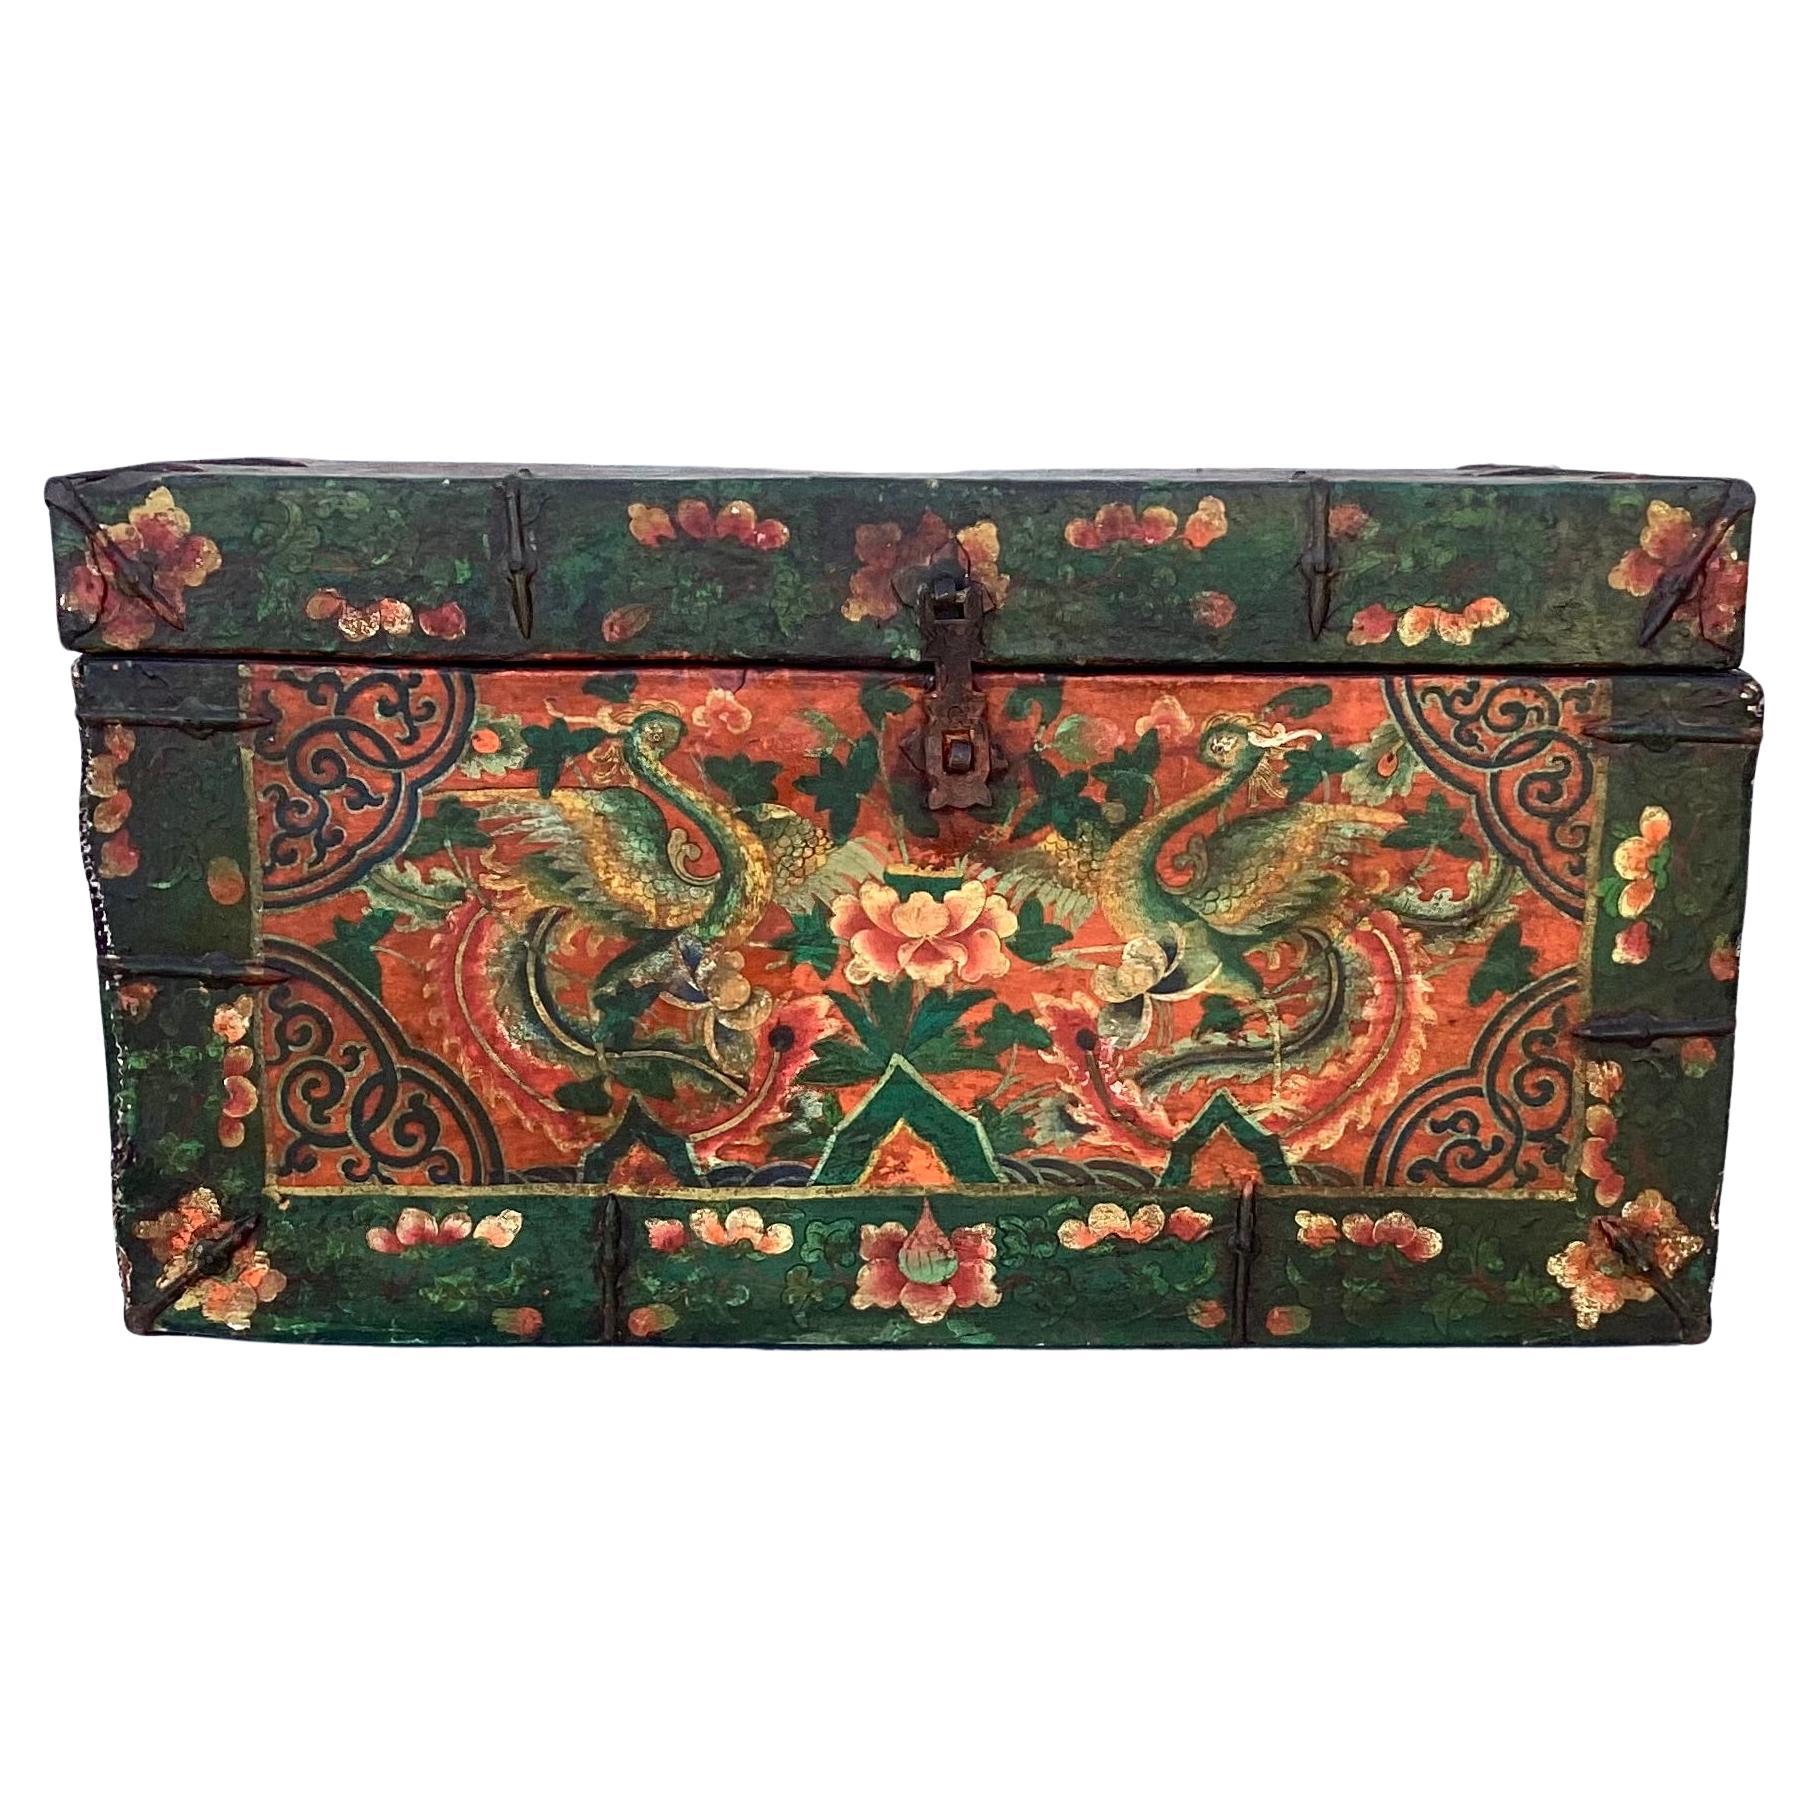 Antique Tibetan Painted Leather And Iron Chest or Trunk For Sale